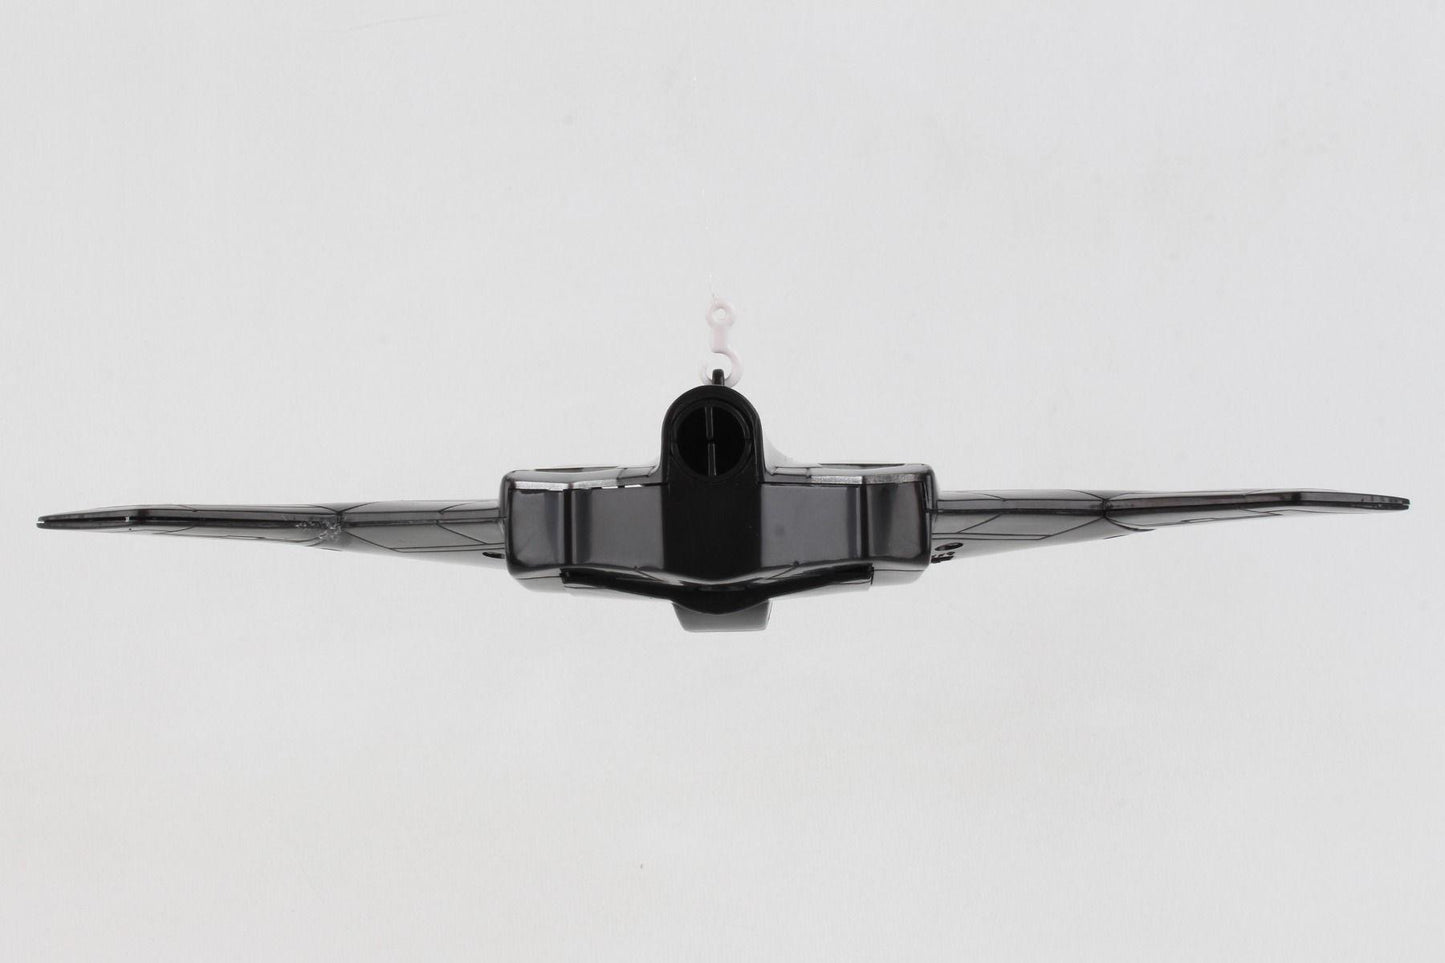 B-2 Bomber Diecast Flying Plane Toy on a String, Navigate itself on a 360 degrees flight path, 5 inches long